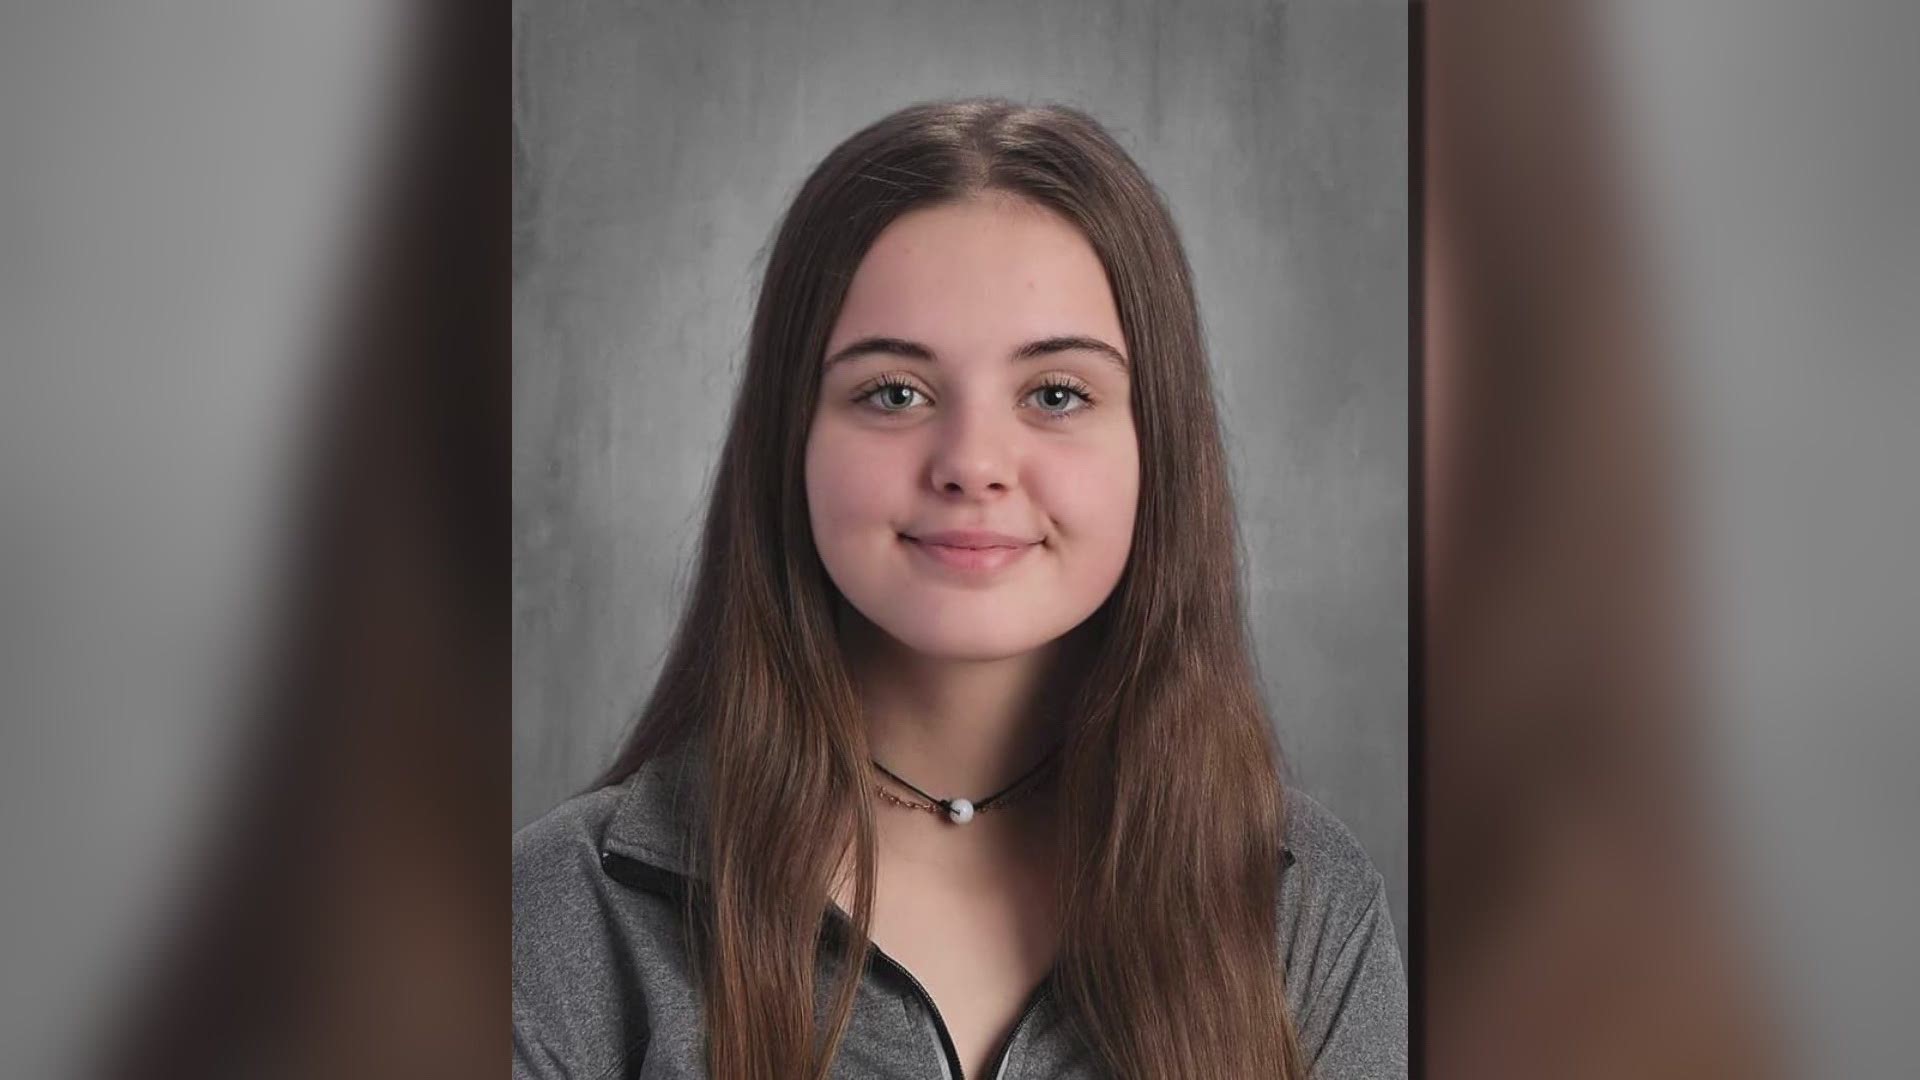 Brooklynn Tortensen is 15 years-old, 5'6" and 125 lbs. She is likely in Southern Maine and was last seen in Saco.